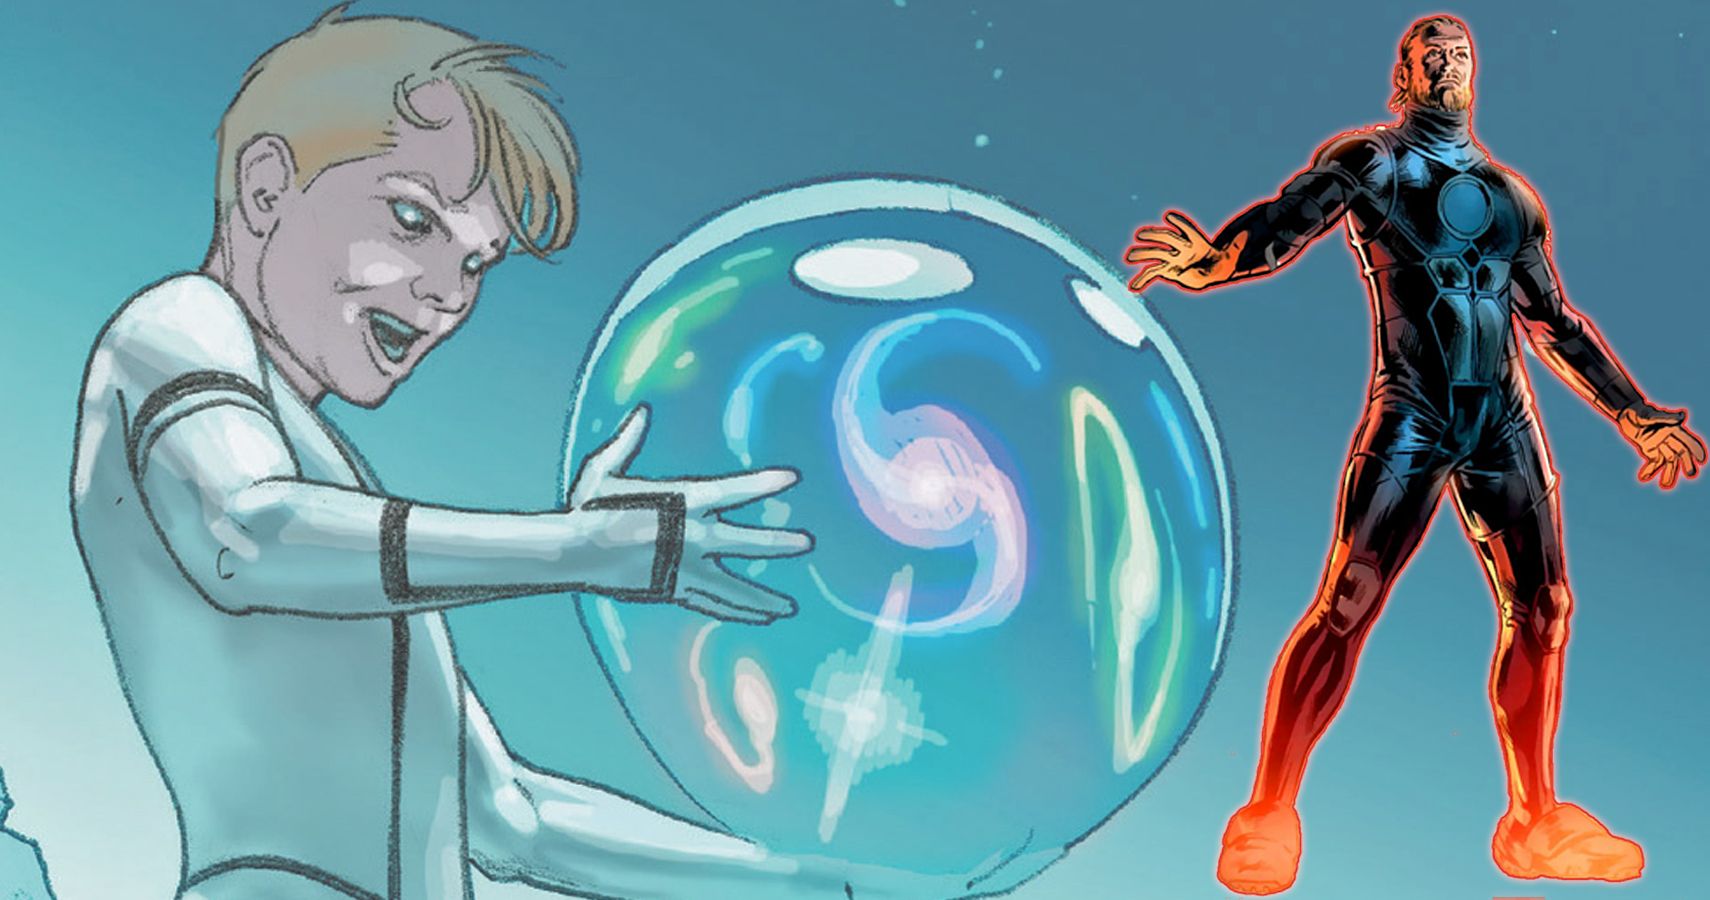 10-Times-Franklin-Richards-Earned-His-Status-As-An-Omega-Level-Mutant.jpg